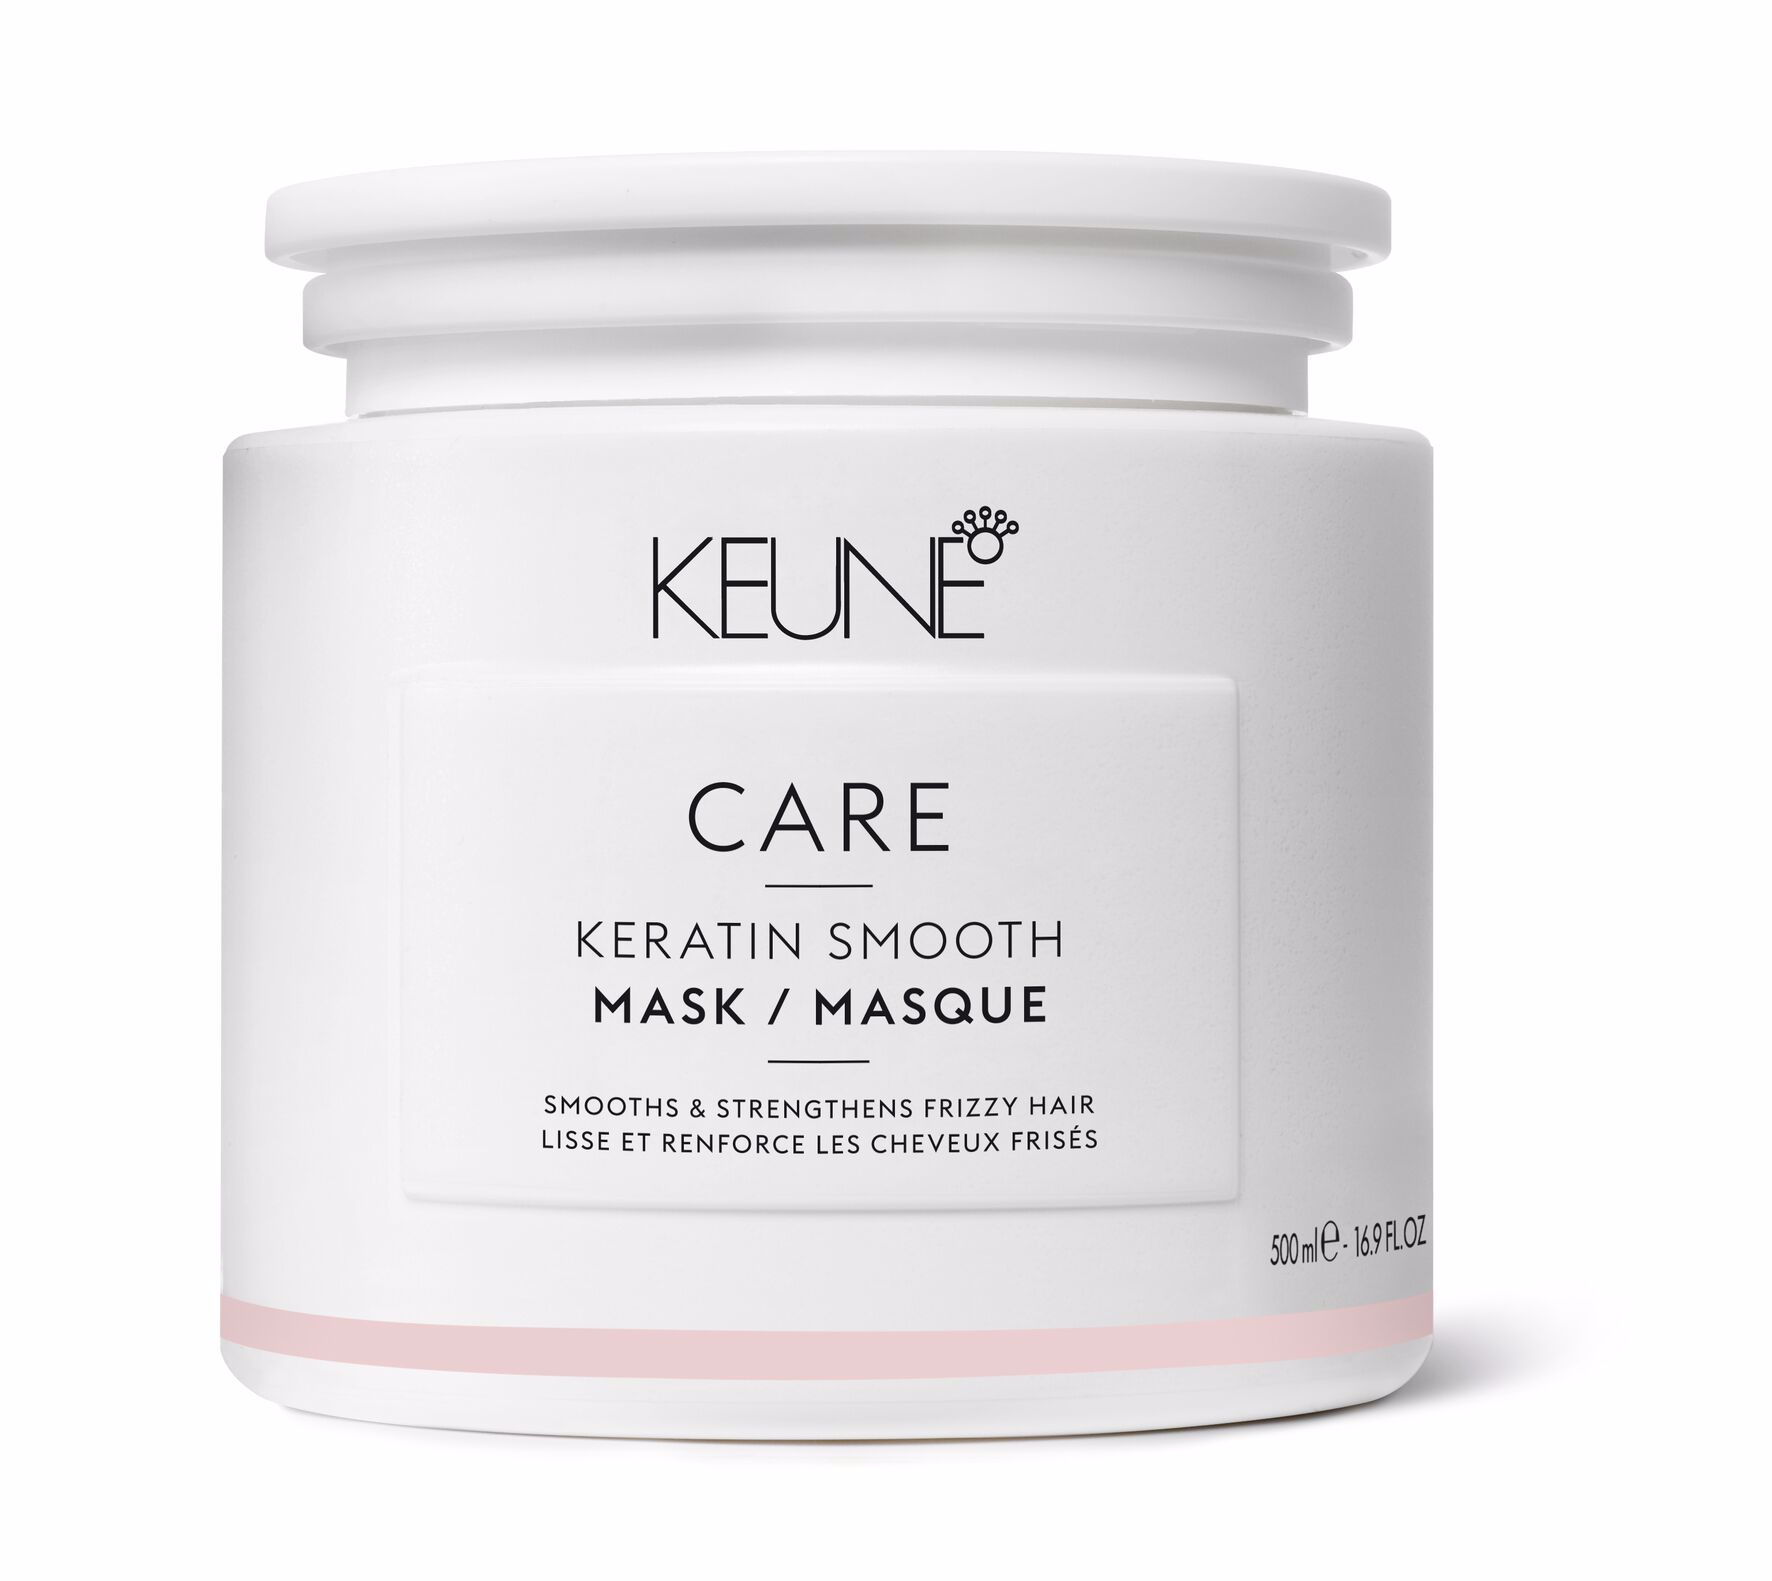 CARE KERATIN SMOOTH MASK gives your hair smoothness and silkiness. This luxurious hair mask is enriched with keratin and Keravis, strengthening hair and effectively fighting frizz. On keune.ch.